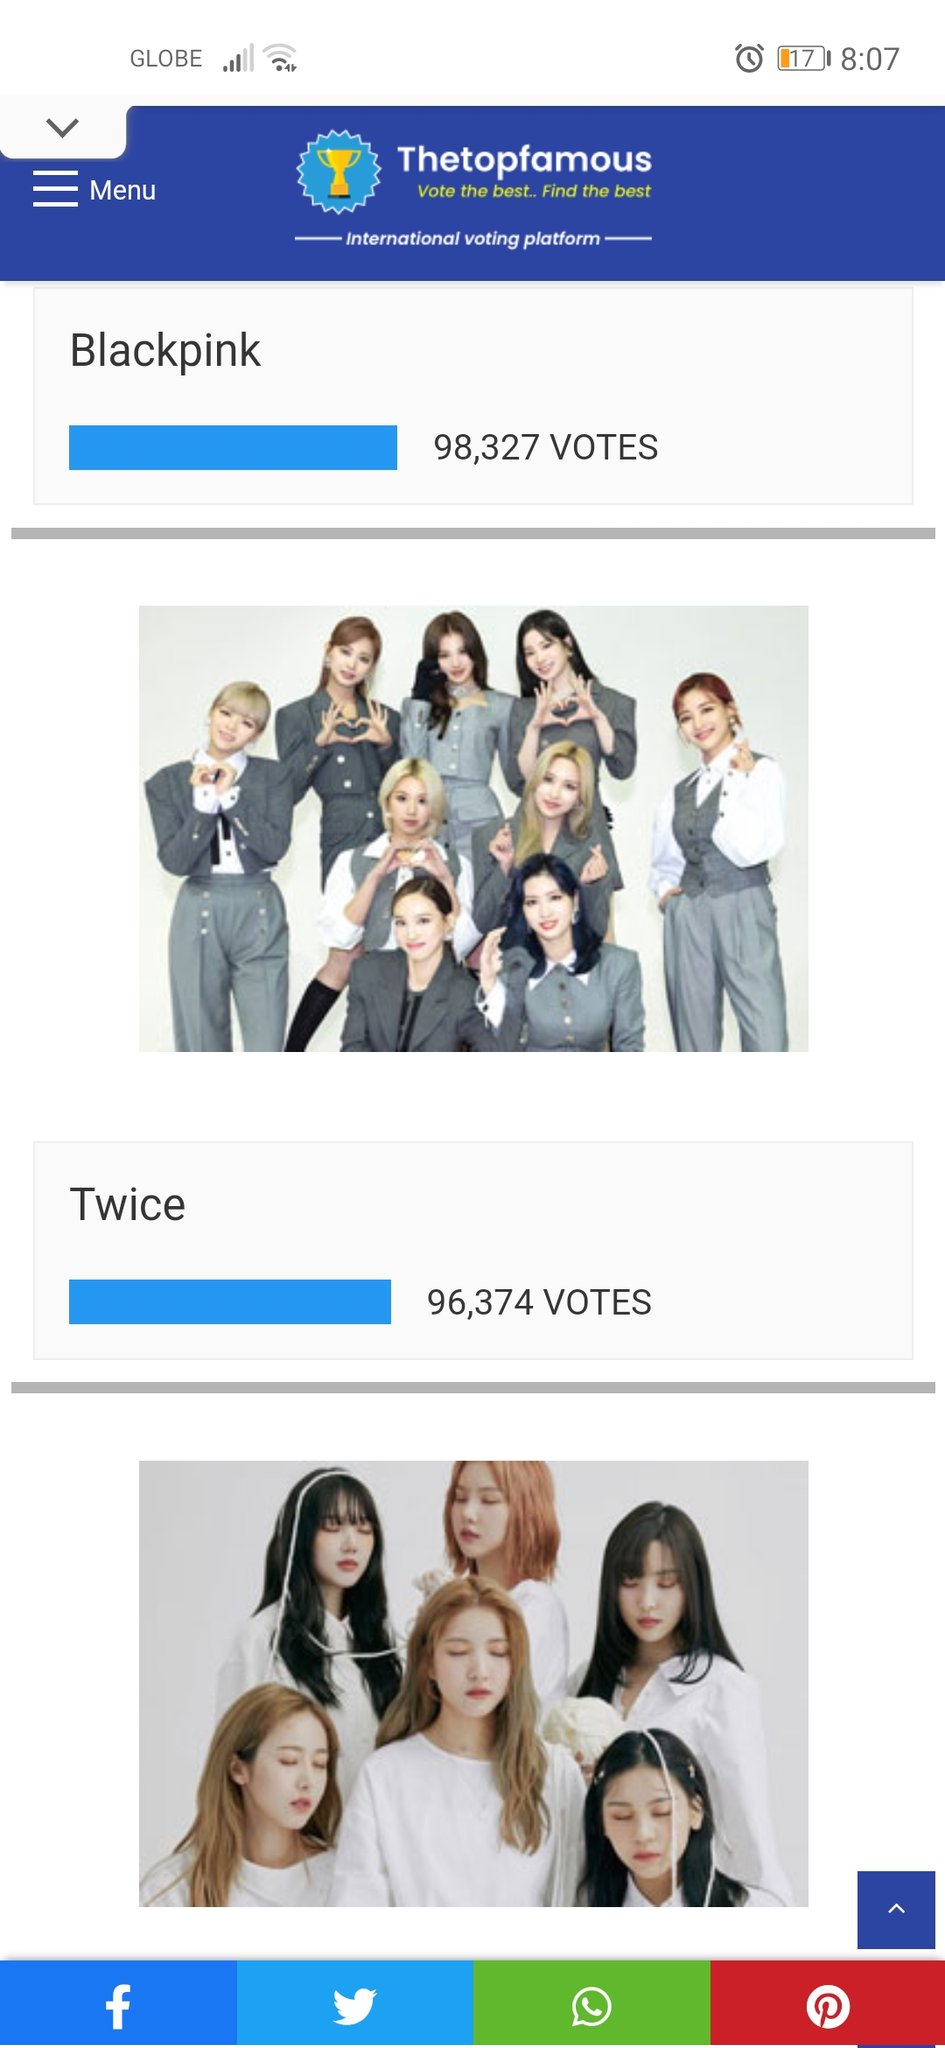 Twice Voting Warriors The Top Best Kpop Girlgroup Jypetwice Is Nominated At Thetopfamous We Are Currently At 2nd Place Just A Little More Votes And We Will Surpass